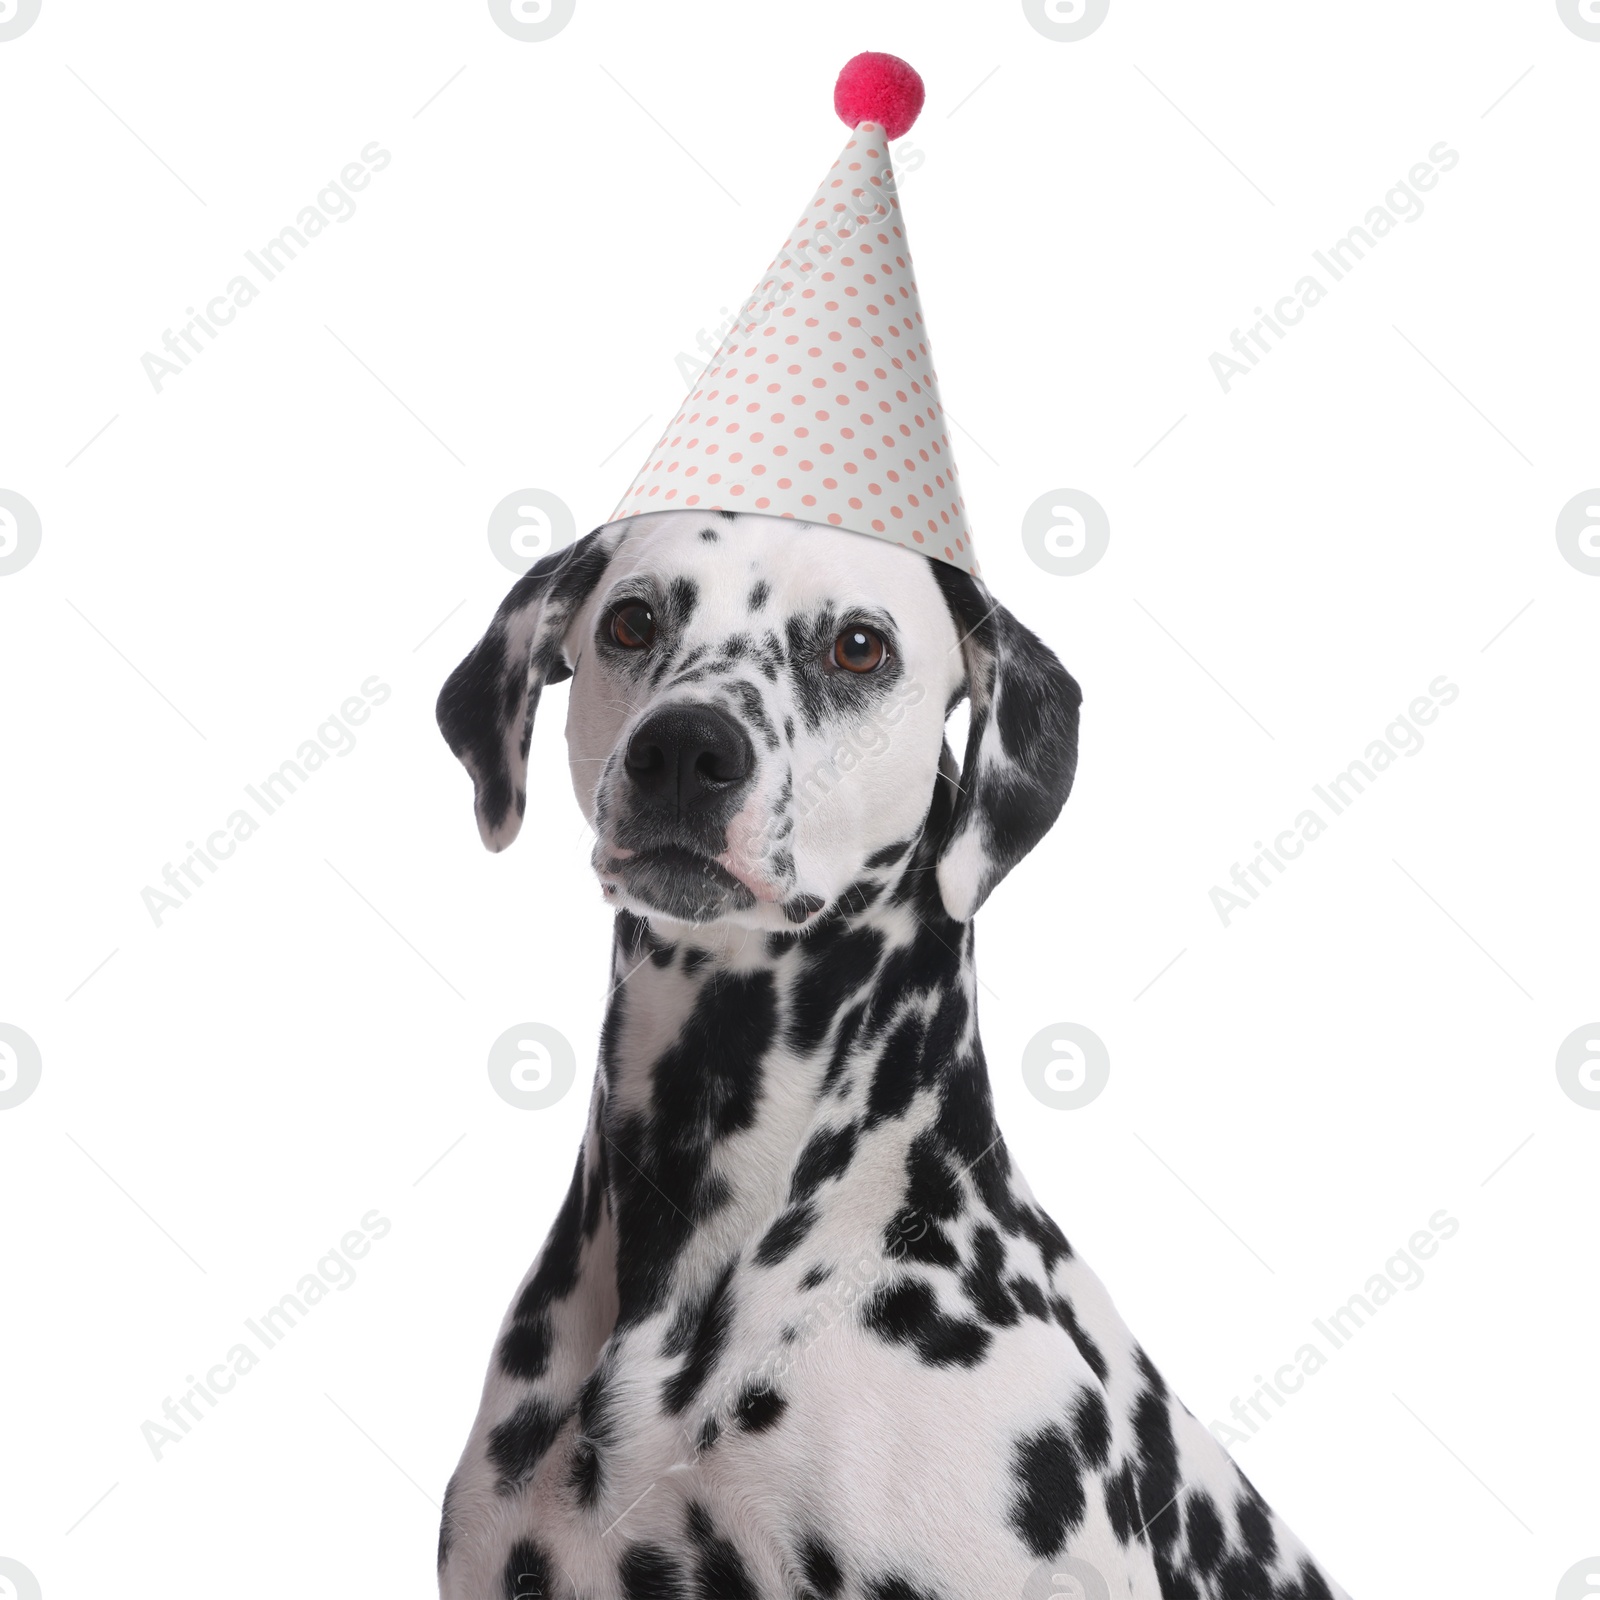 Image of Cute Dalmatian dog with party hat on white background